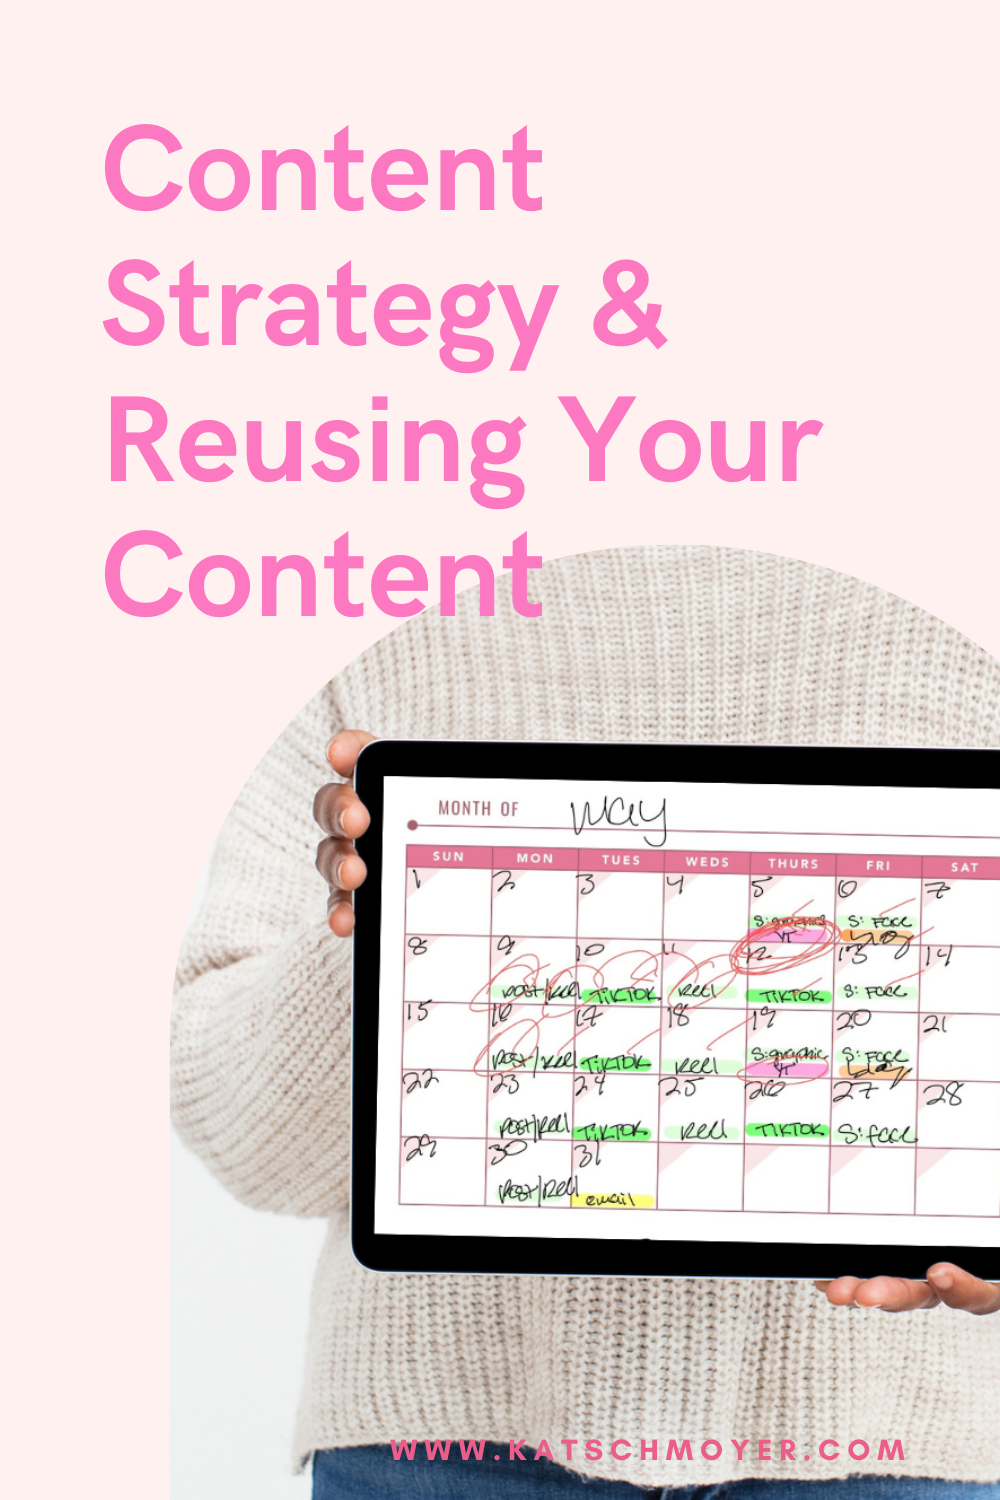 Content Strategy & Reusing Your Content